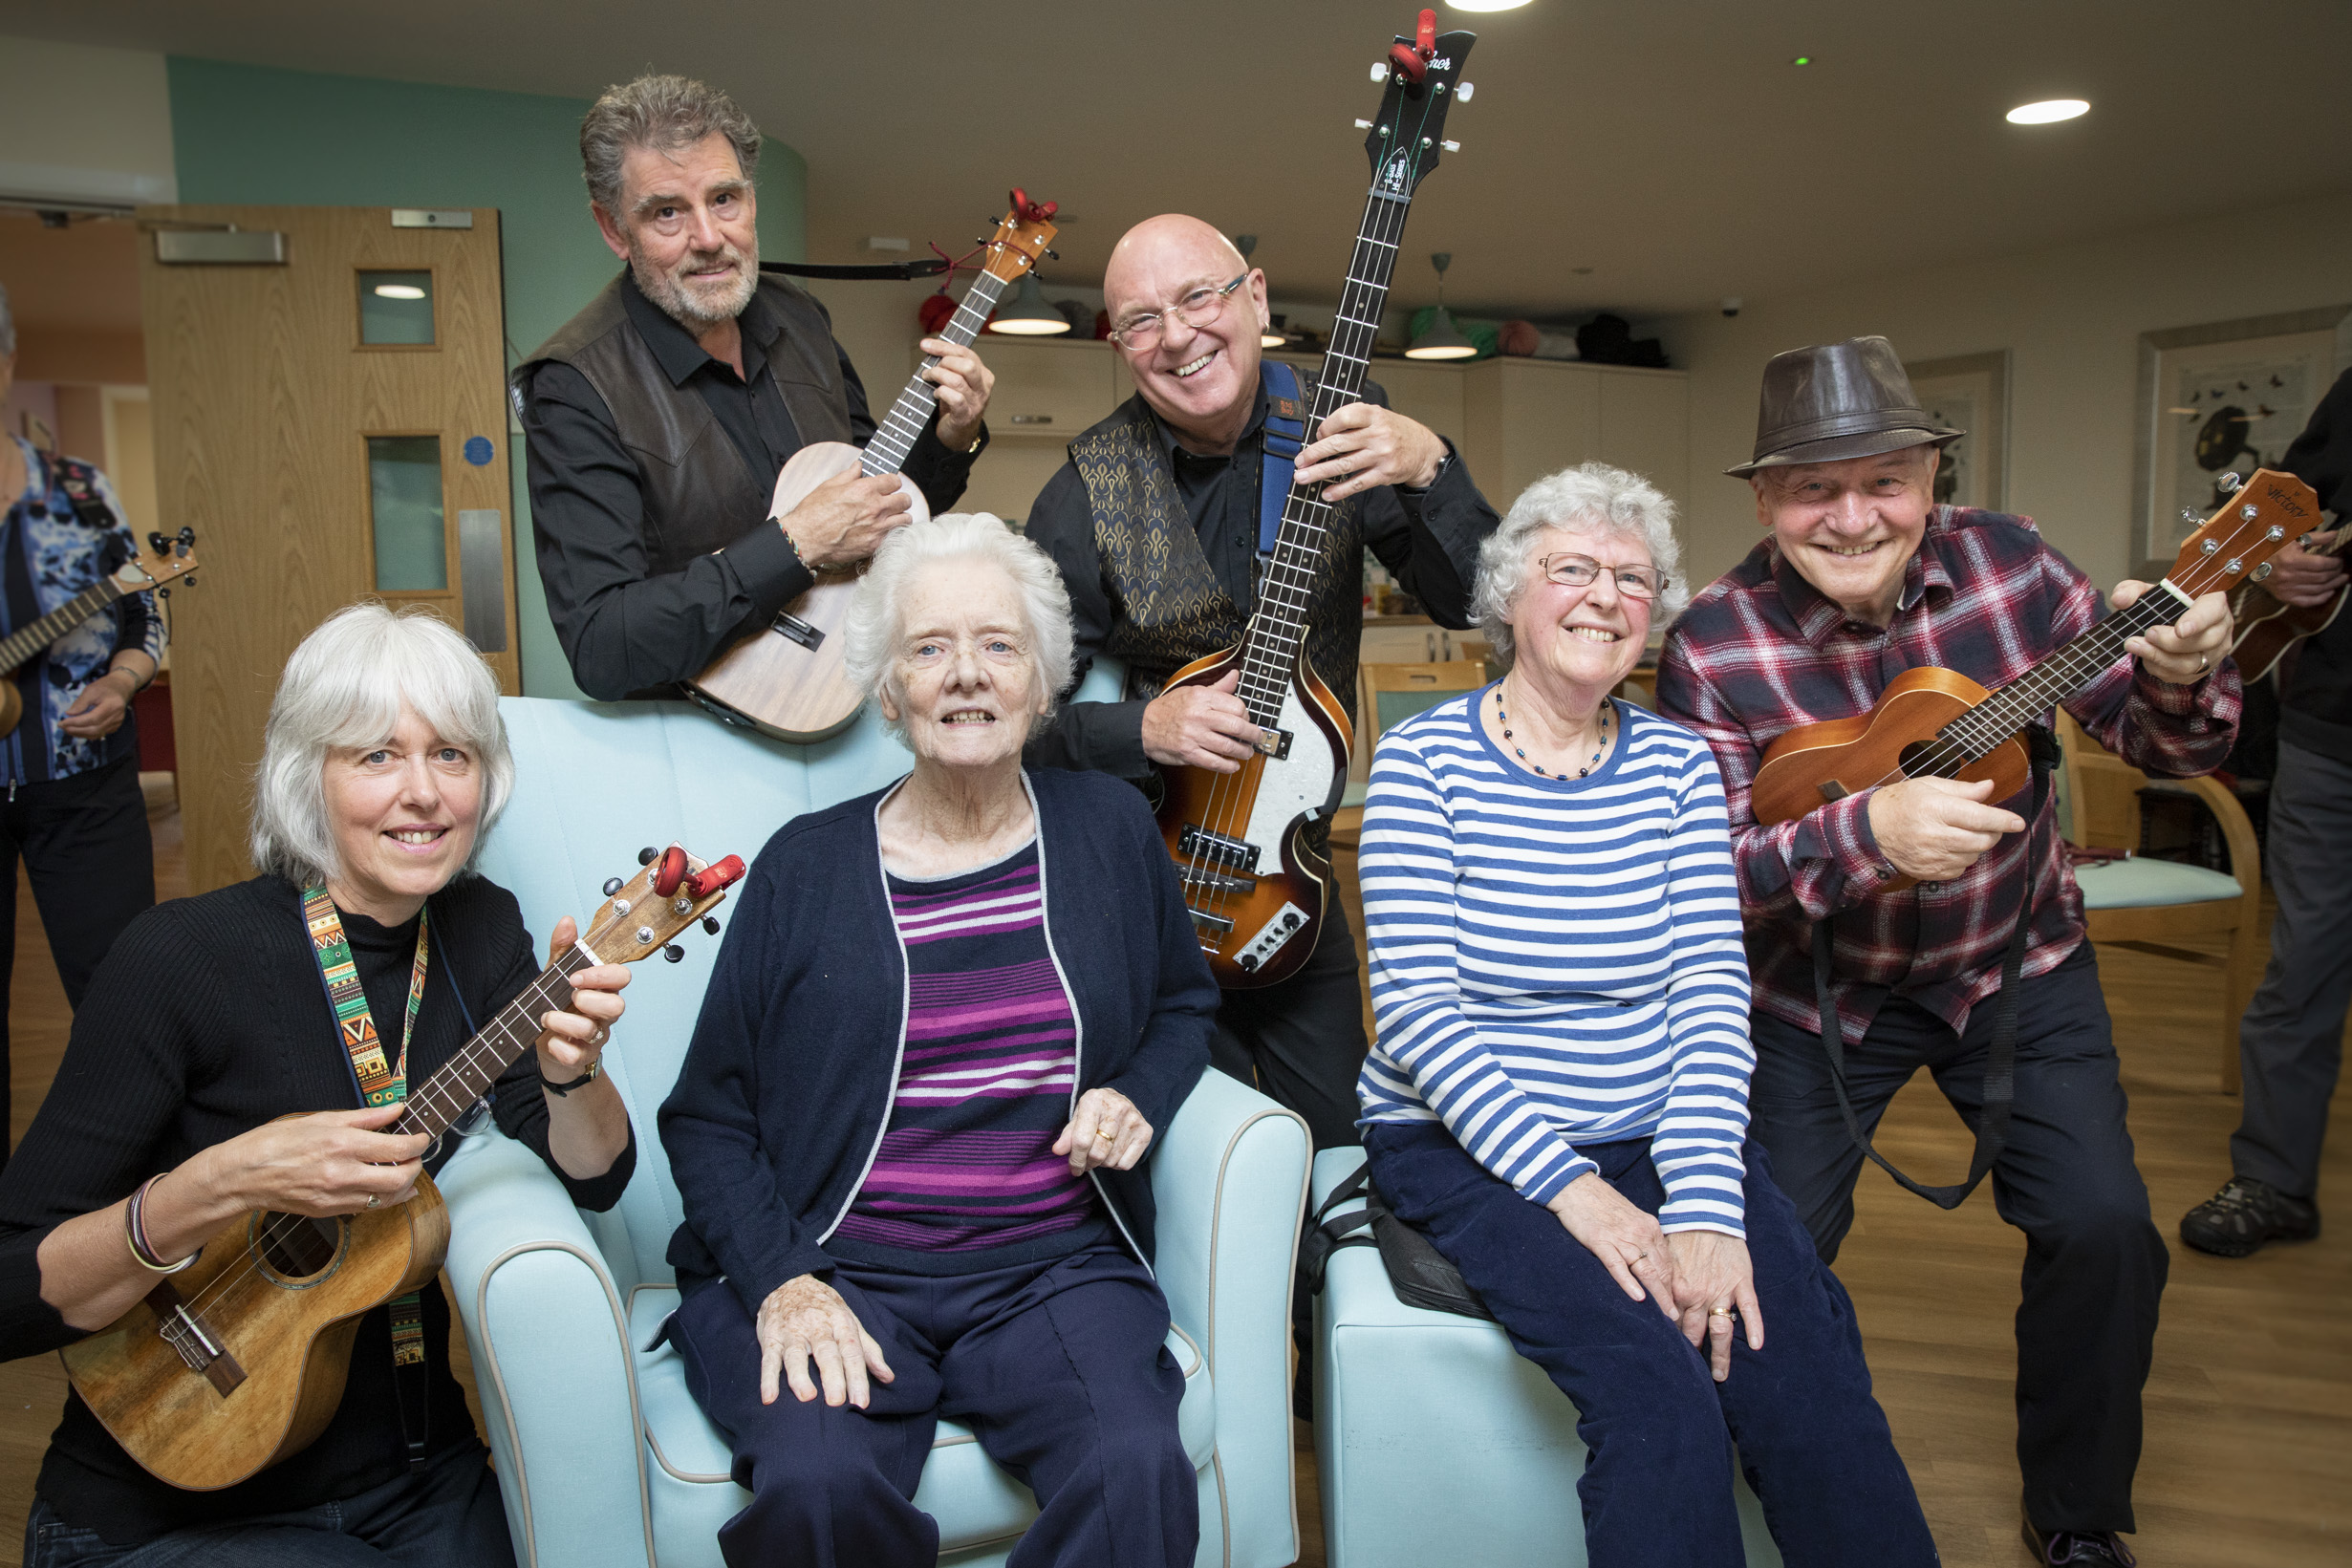 Ukelele band bring joy at care home and raise money for charity